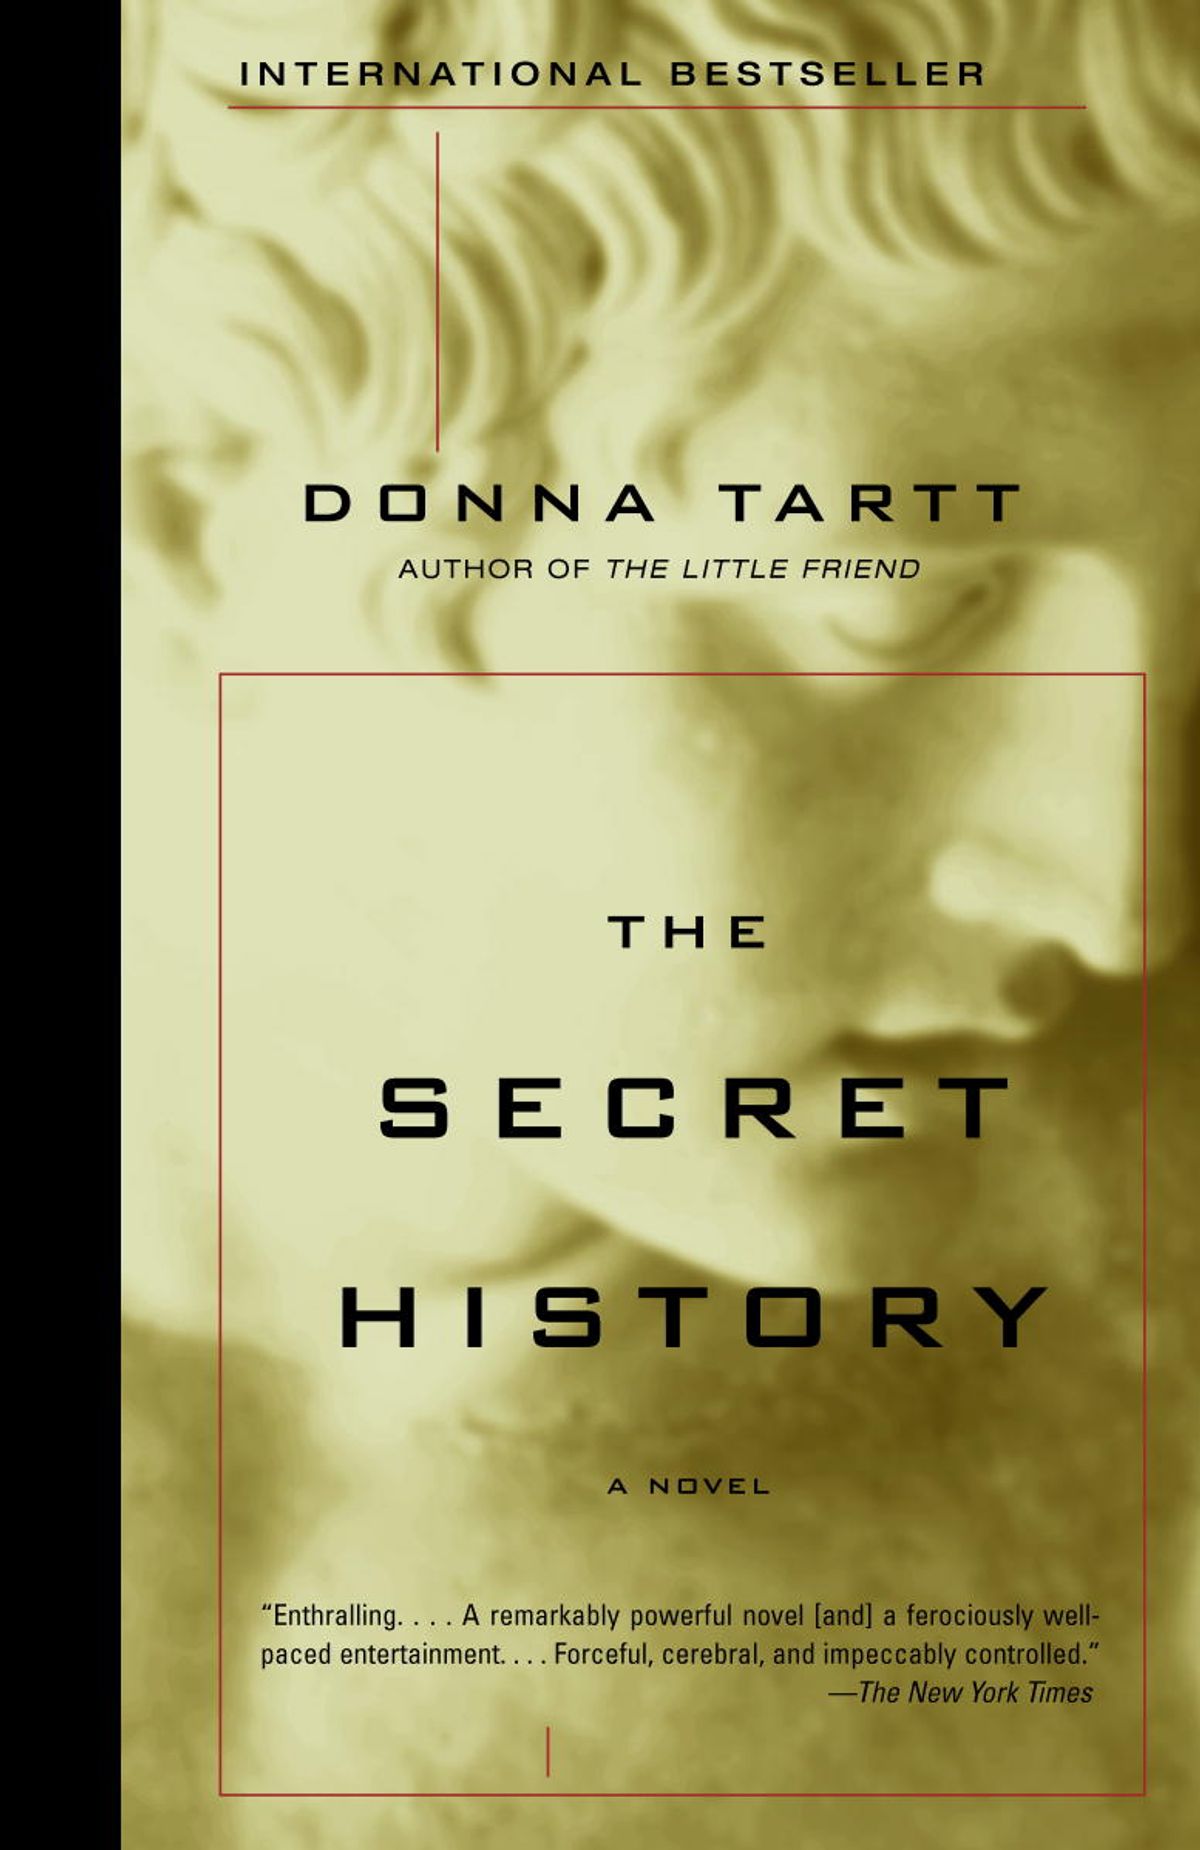 Image for "The Secret History"